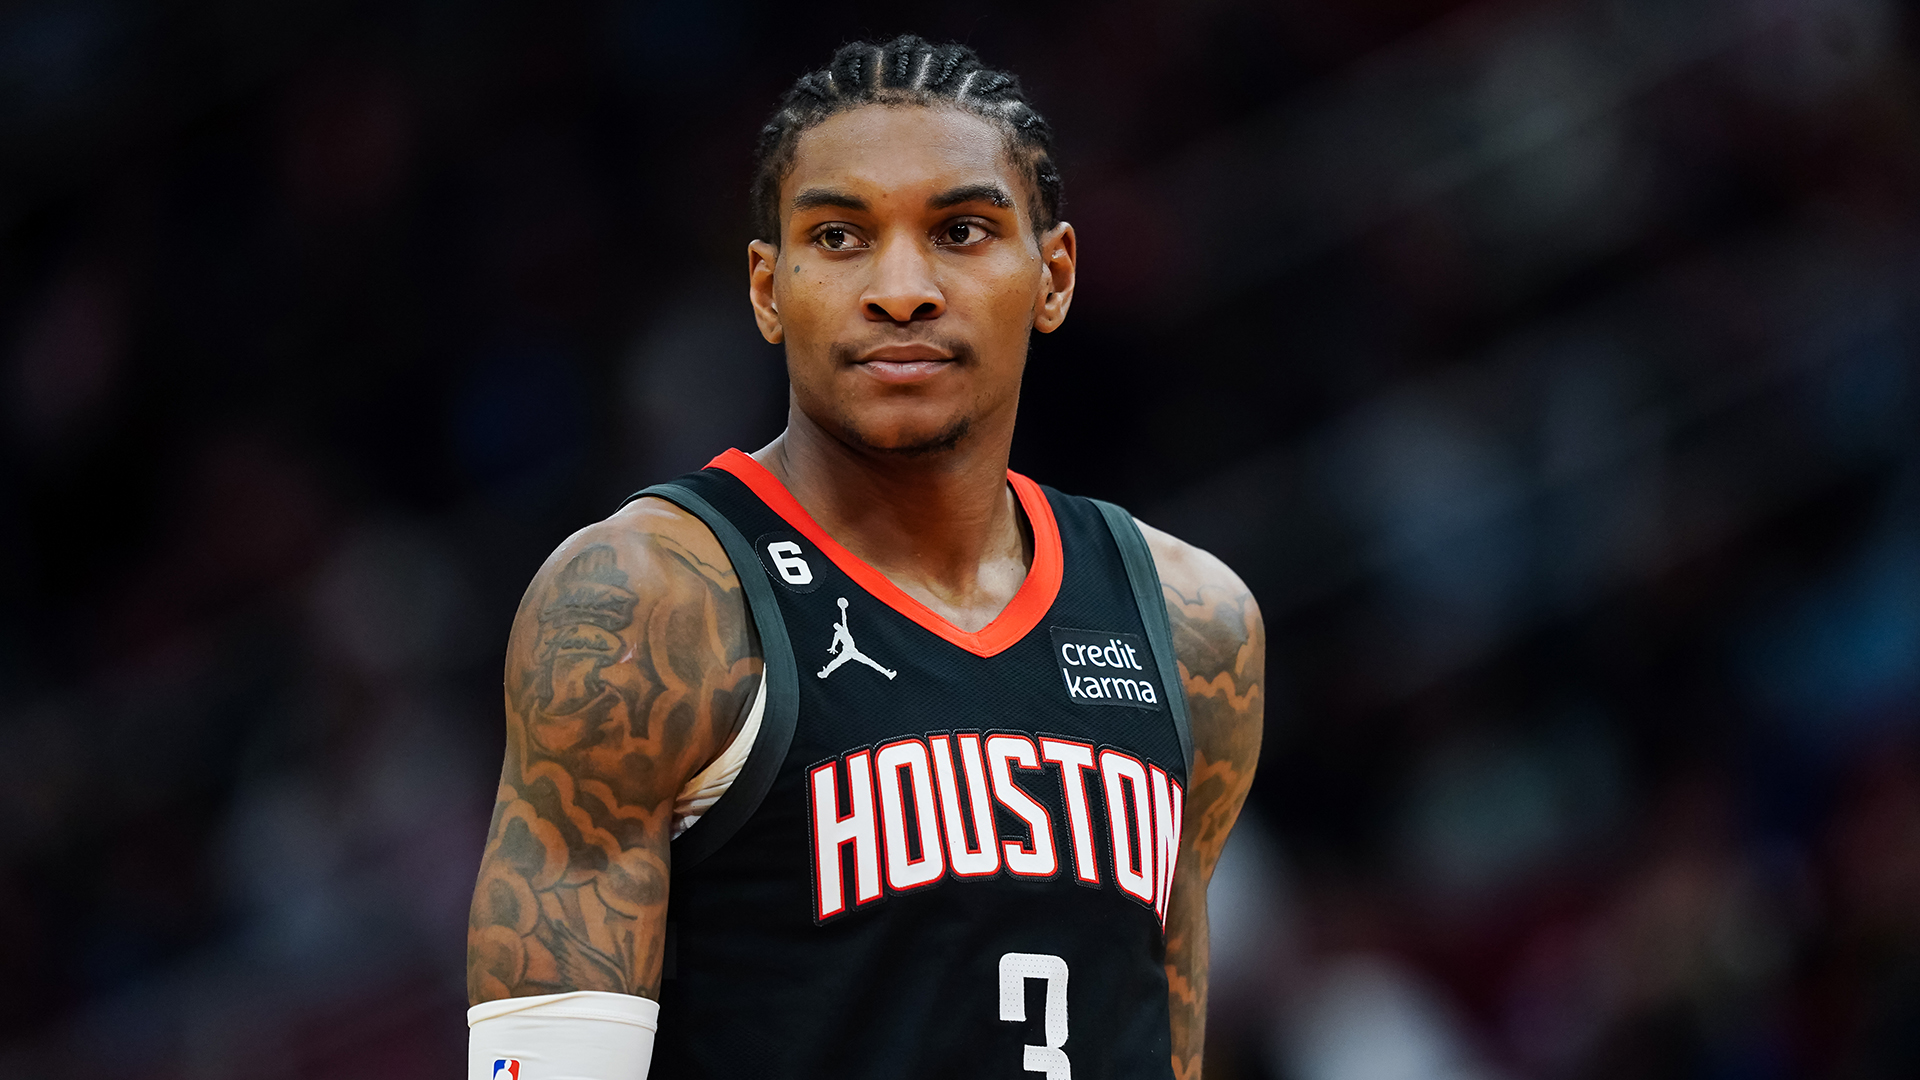 Kevin Porter Jr. #3 of the Houston Rockets looks on during the game against the Golden State Warriors at Toyota Center on March 20, 2023 in Houston, Texas.